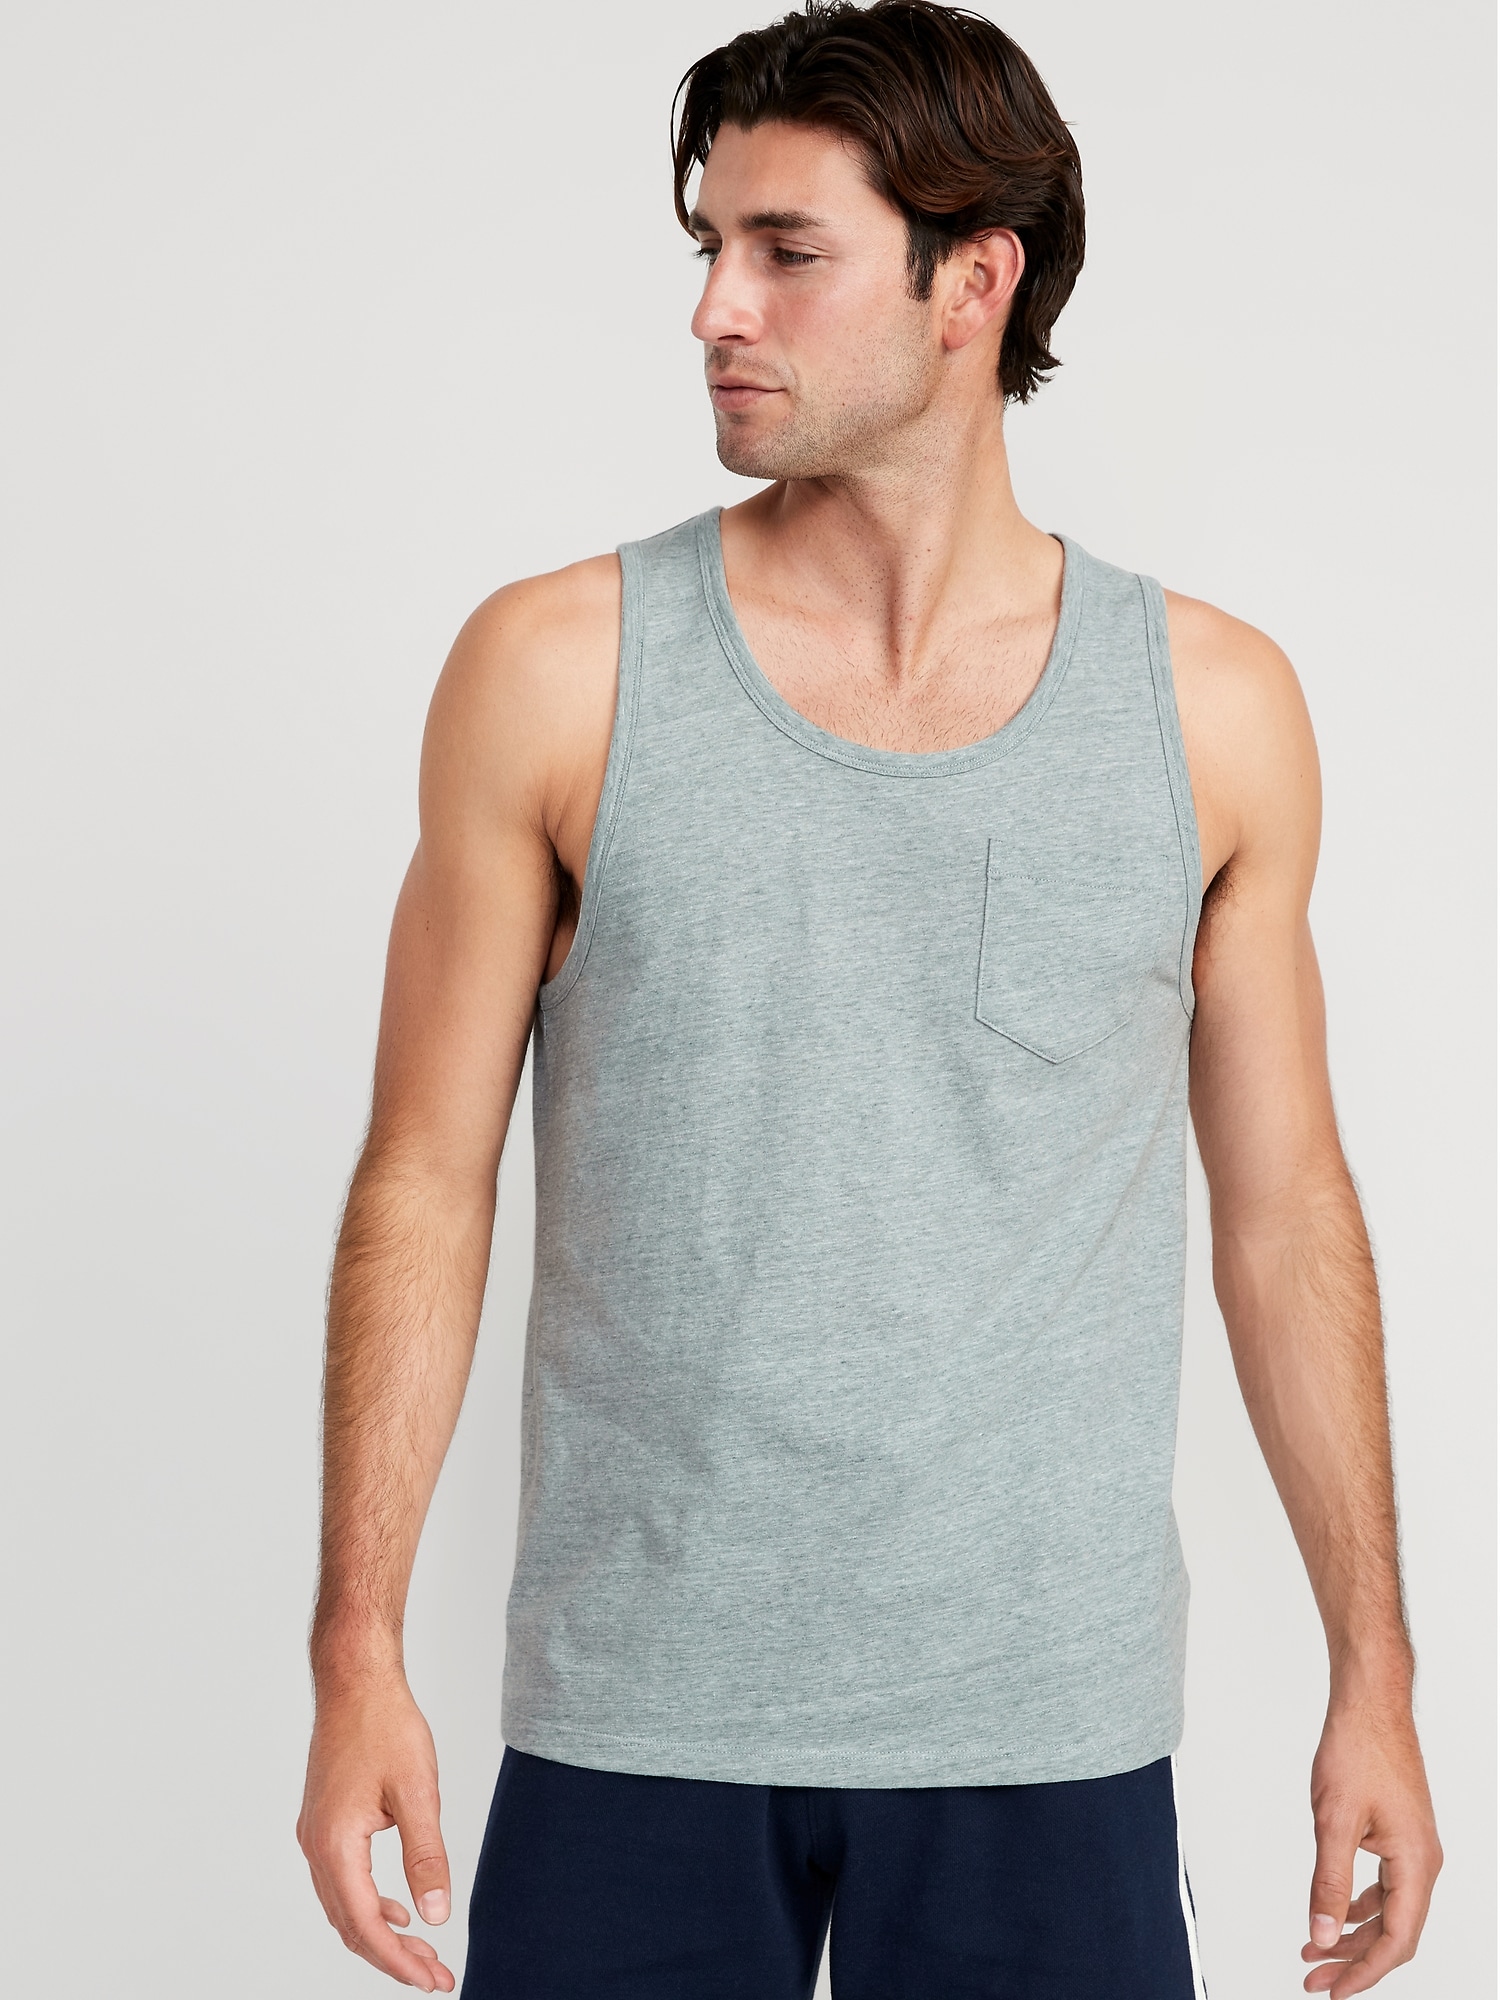 Old Navy Classic Pocket Tank Top for Men brown. 1